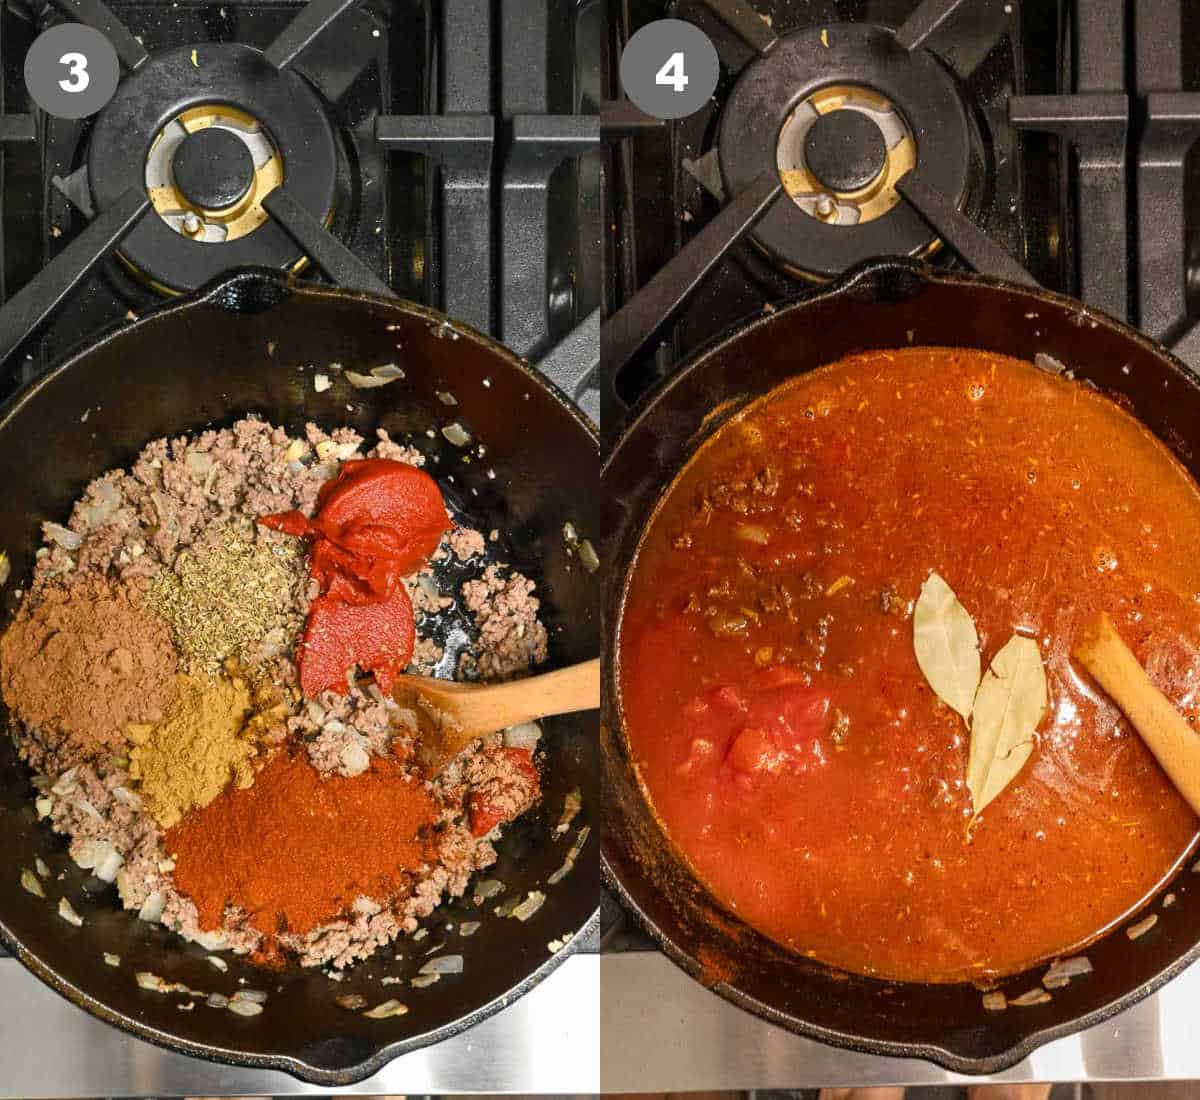 Spices and tomato paste added in then beef stock, tomato sauce and canned tomatoes.